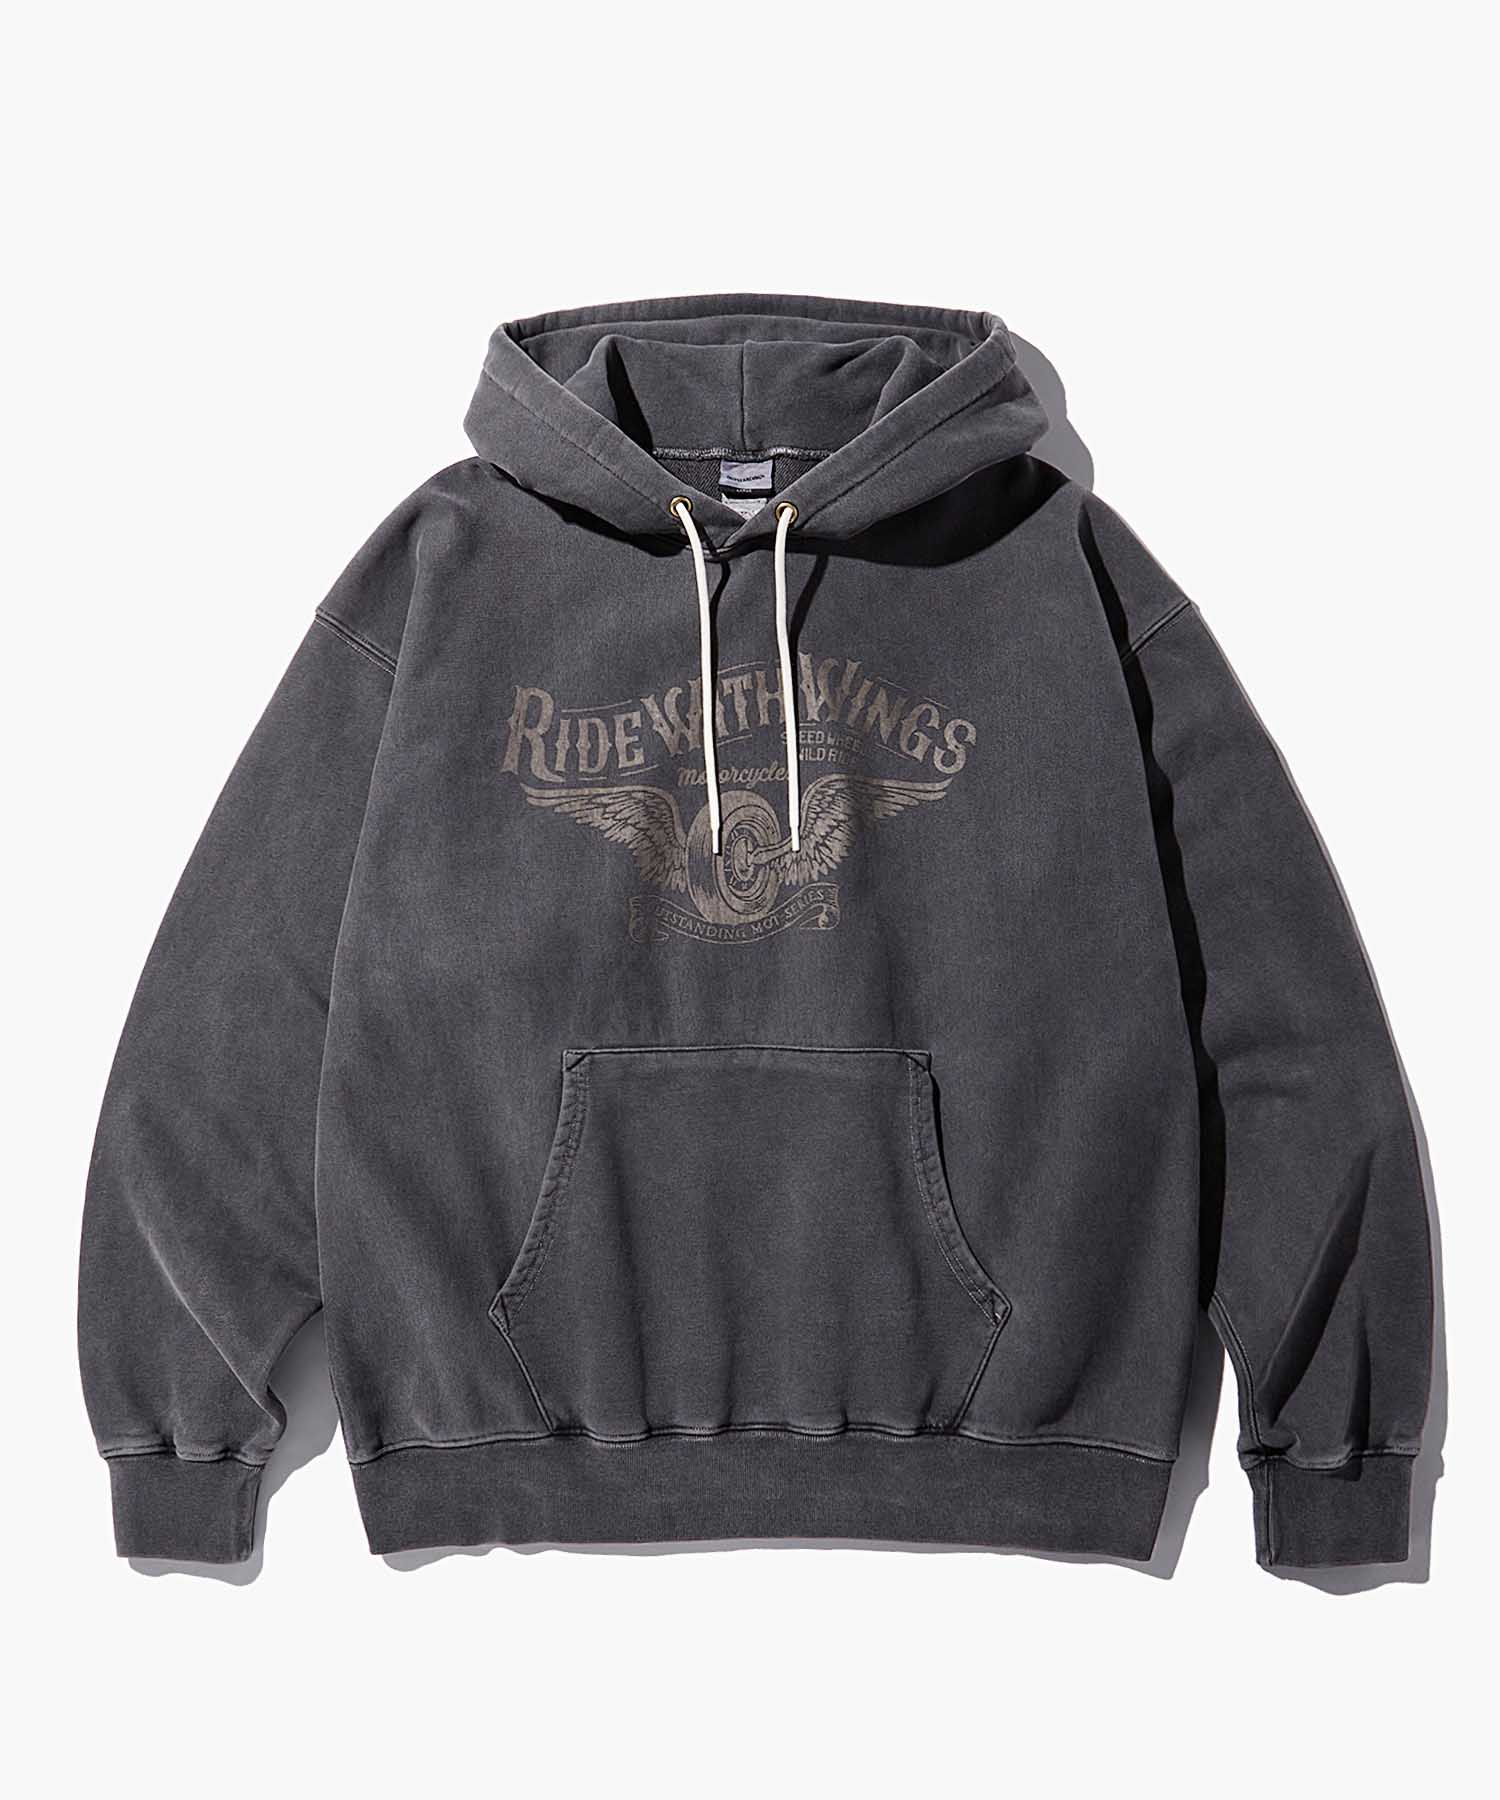 MOT SERIES HOOD SWEAT(RIDE WITH WINGS)_PIGMENT CHARCOAL